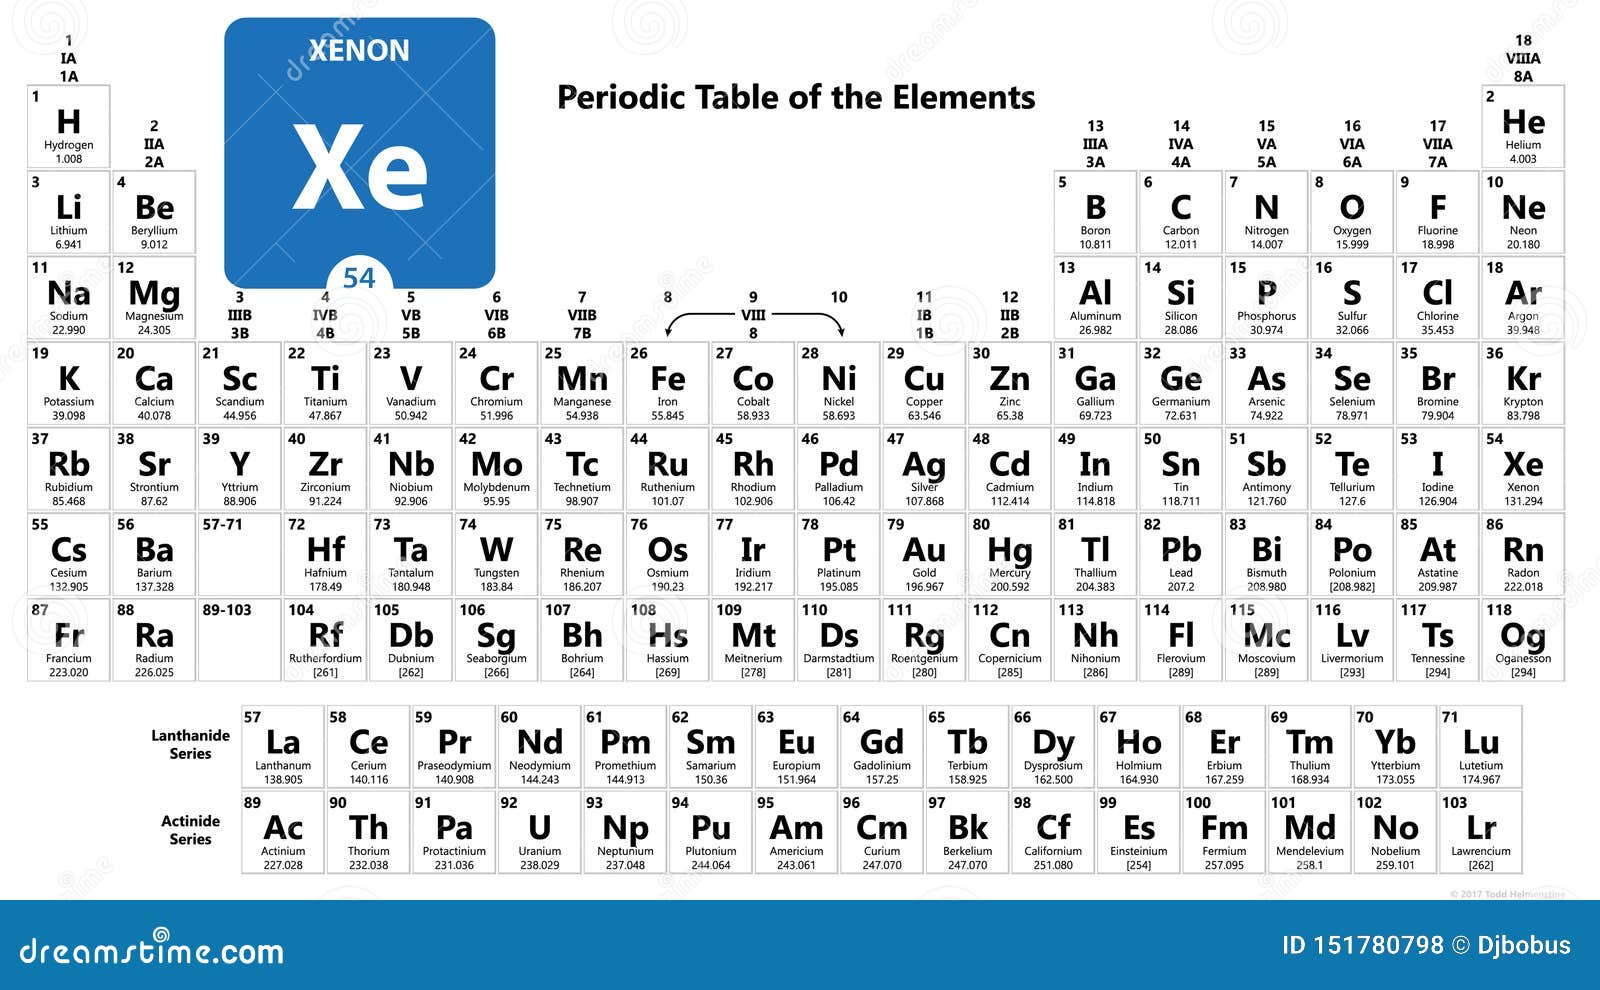 Xenon Xe Chemical Element. Xenon Sign with Atomic Number. Chemical